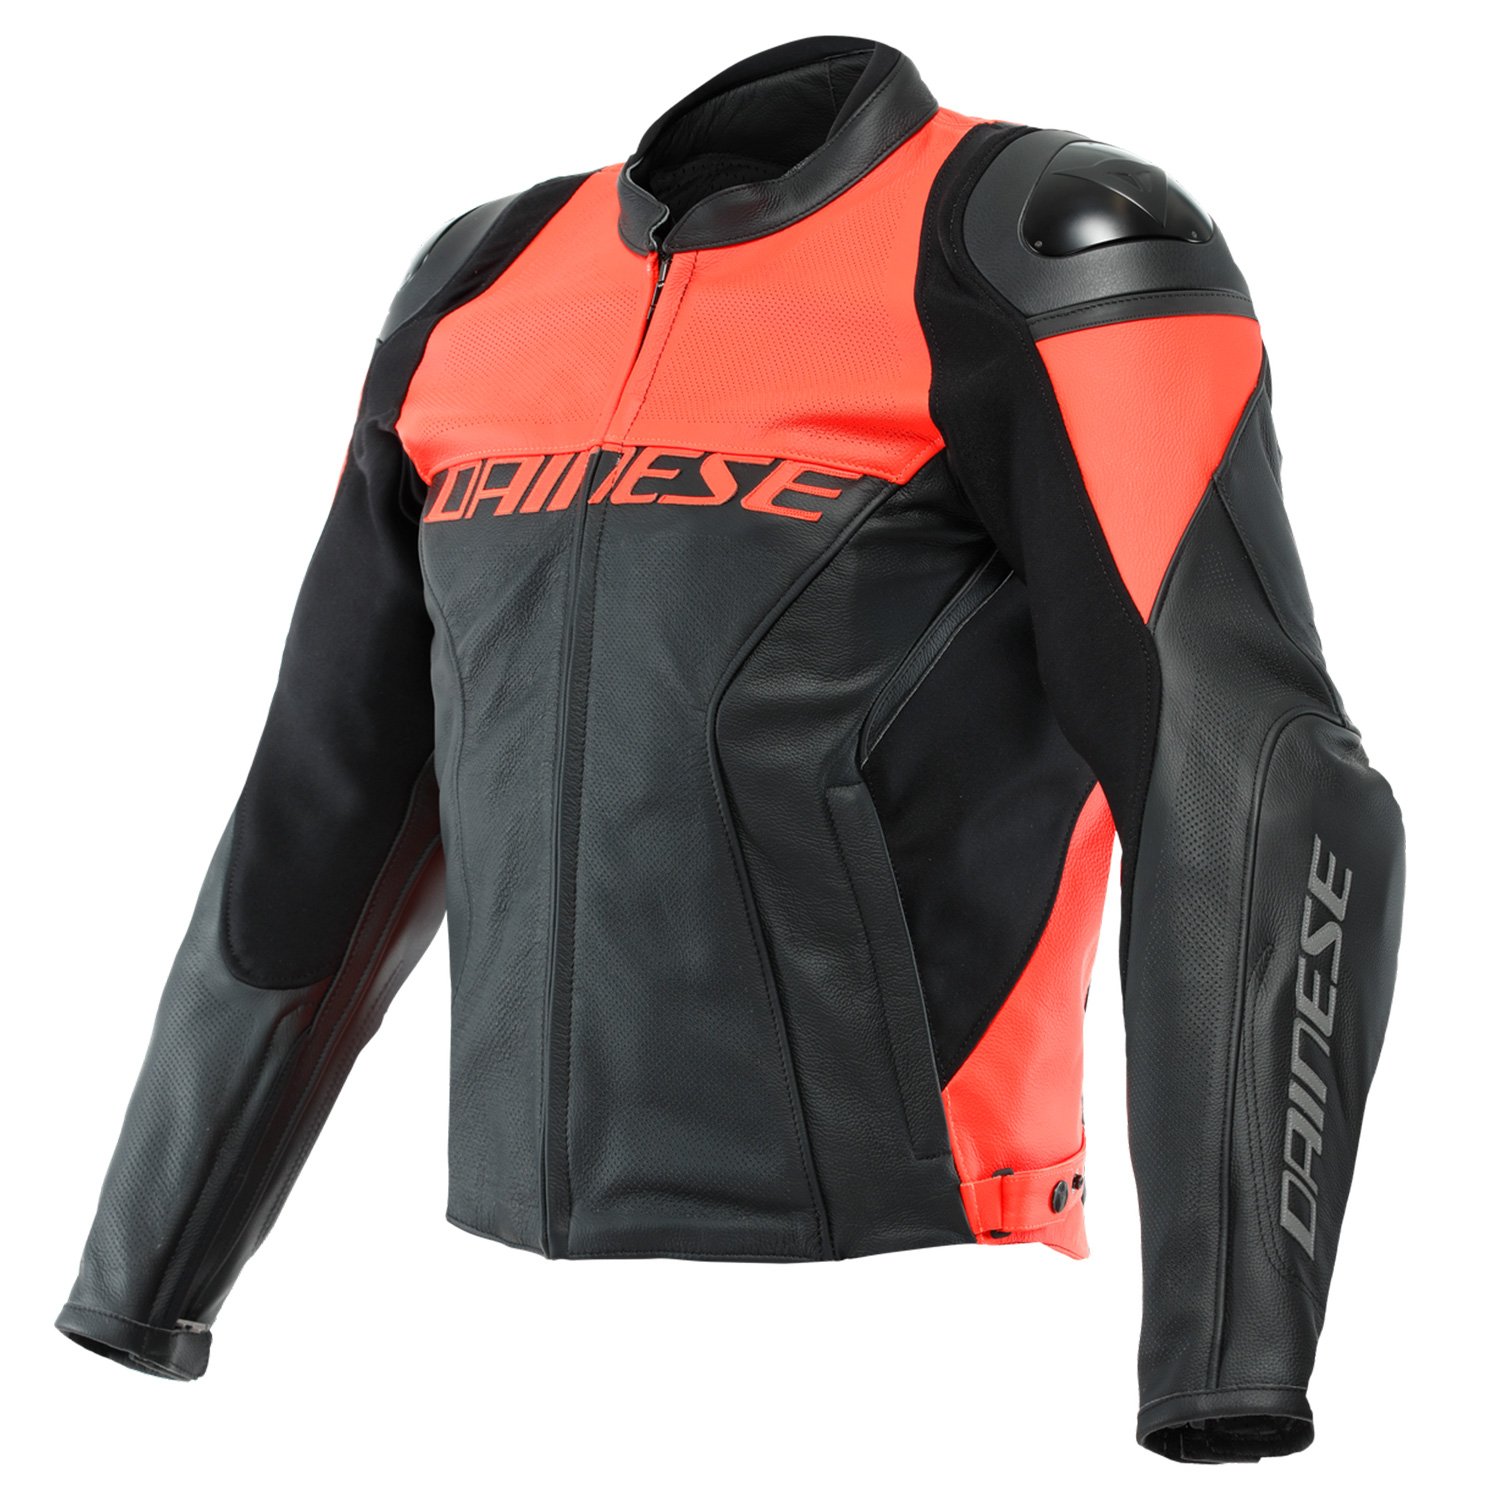 Image of Dainese Racing 4 Perforated Leather Jacket Black Fluo Red Size 62 ID 8051019303103